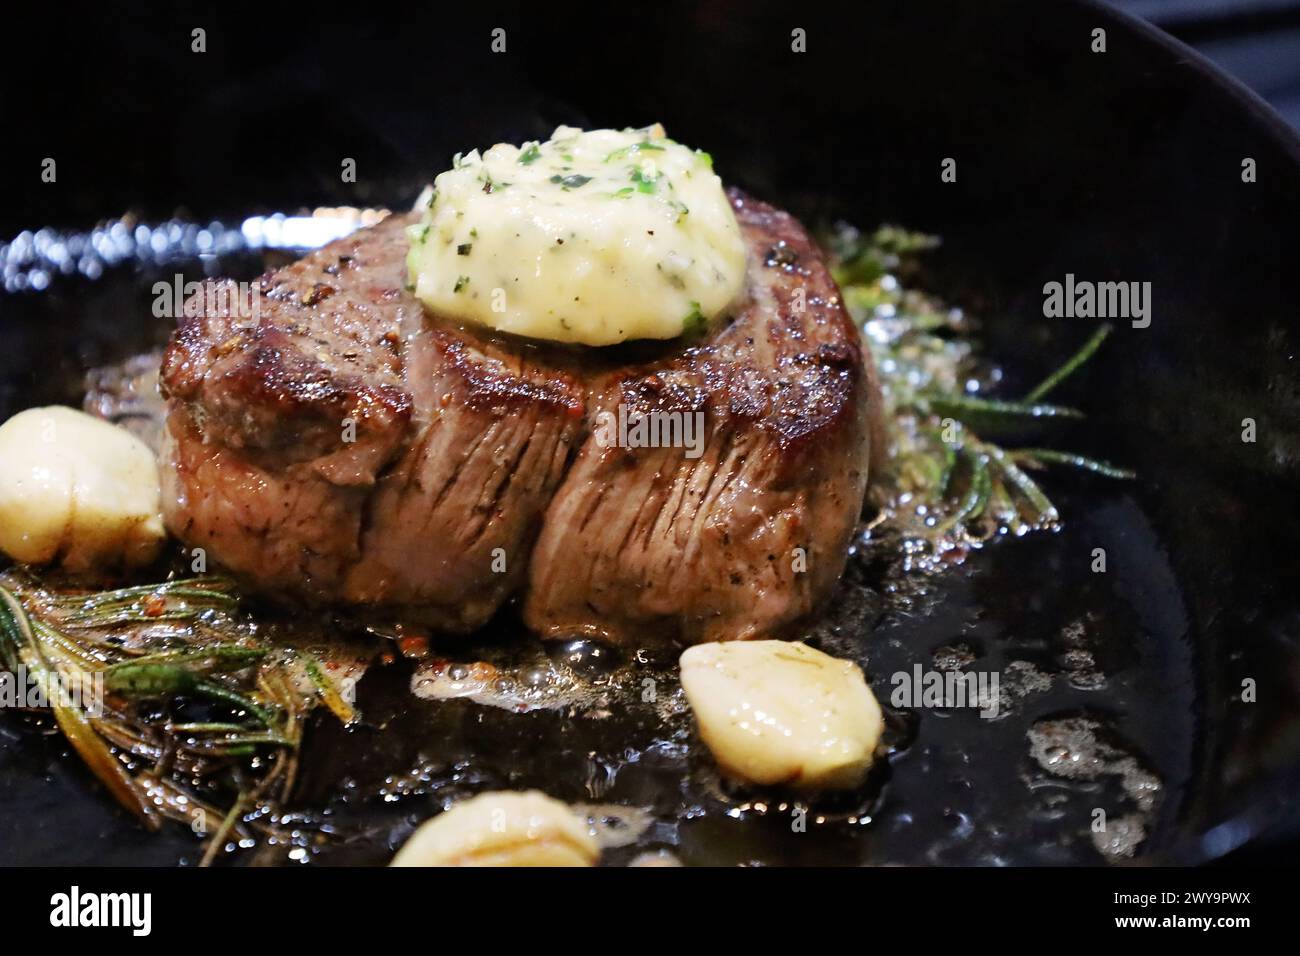 Seared filet mignon steak with herbs in cast iron skillet Stock Photo